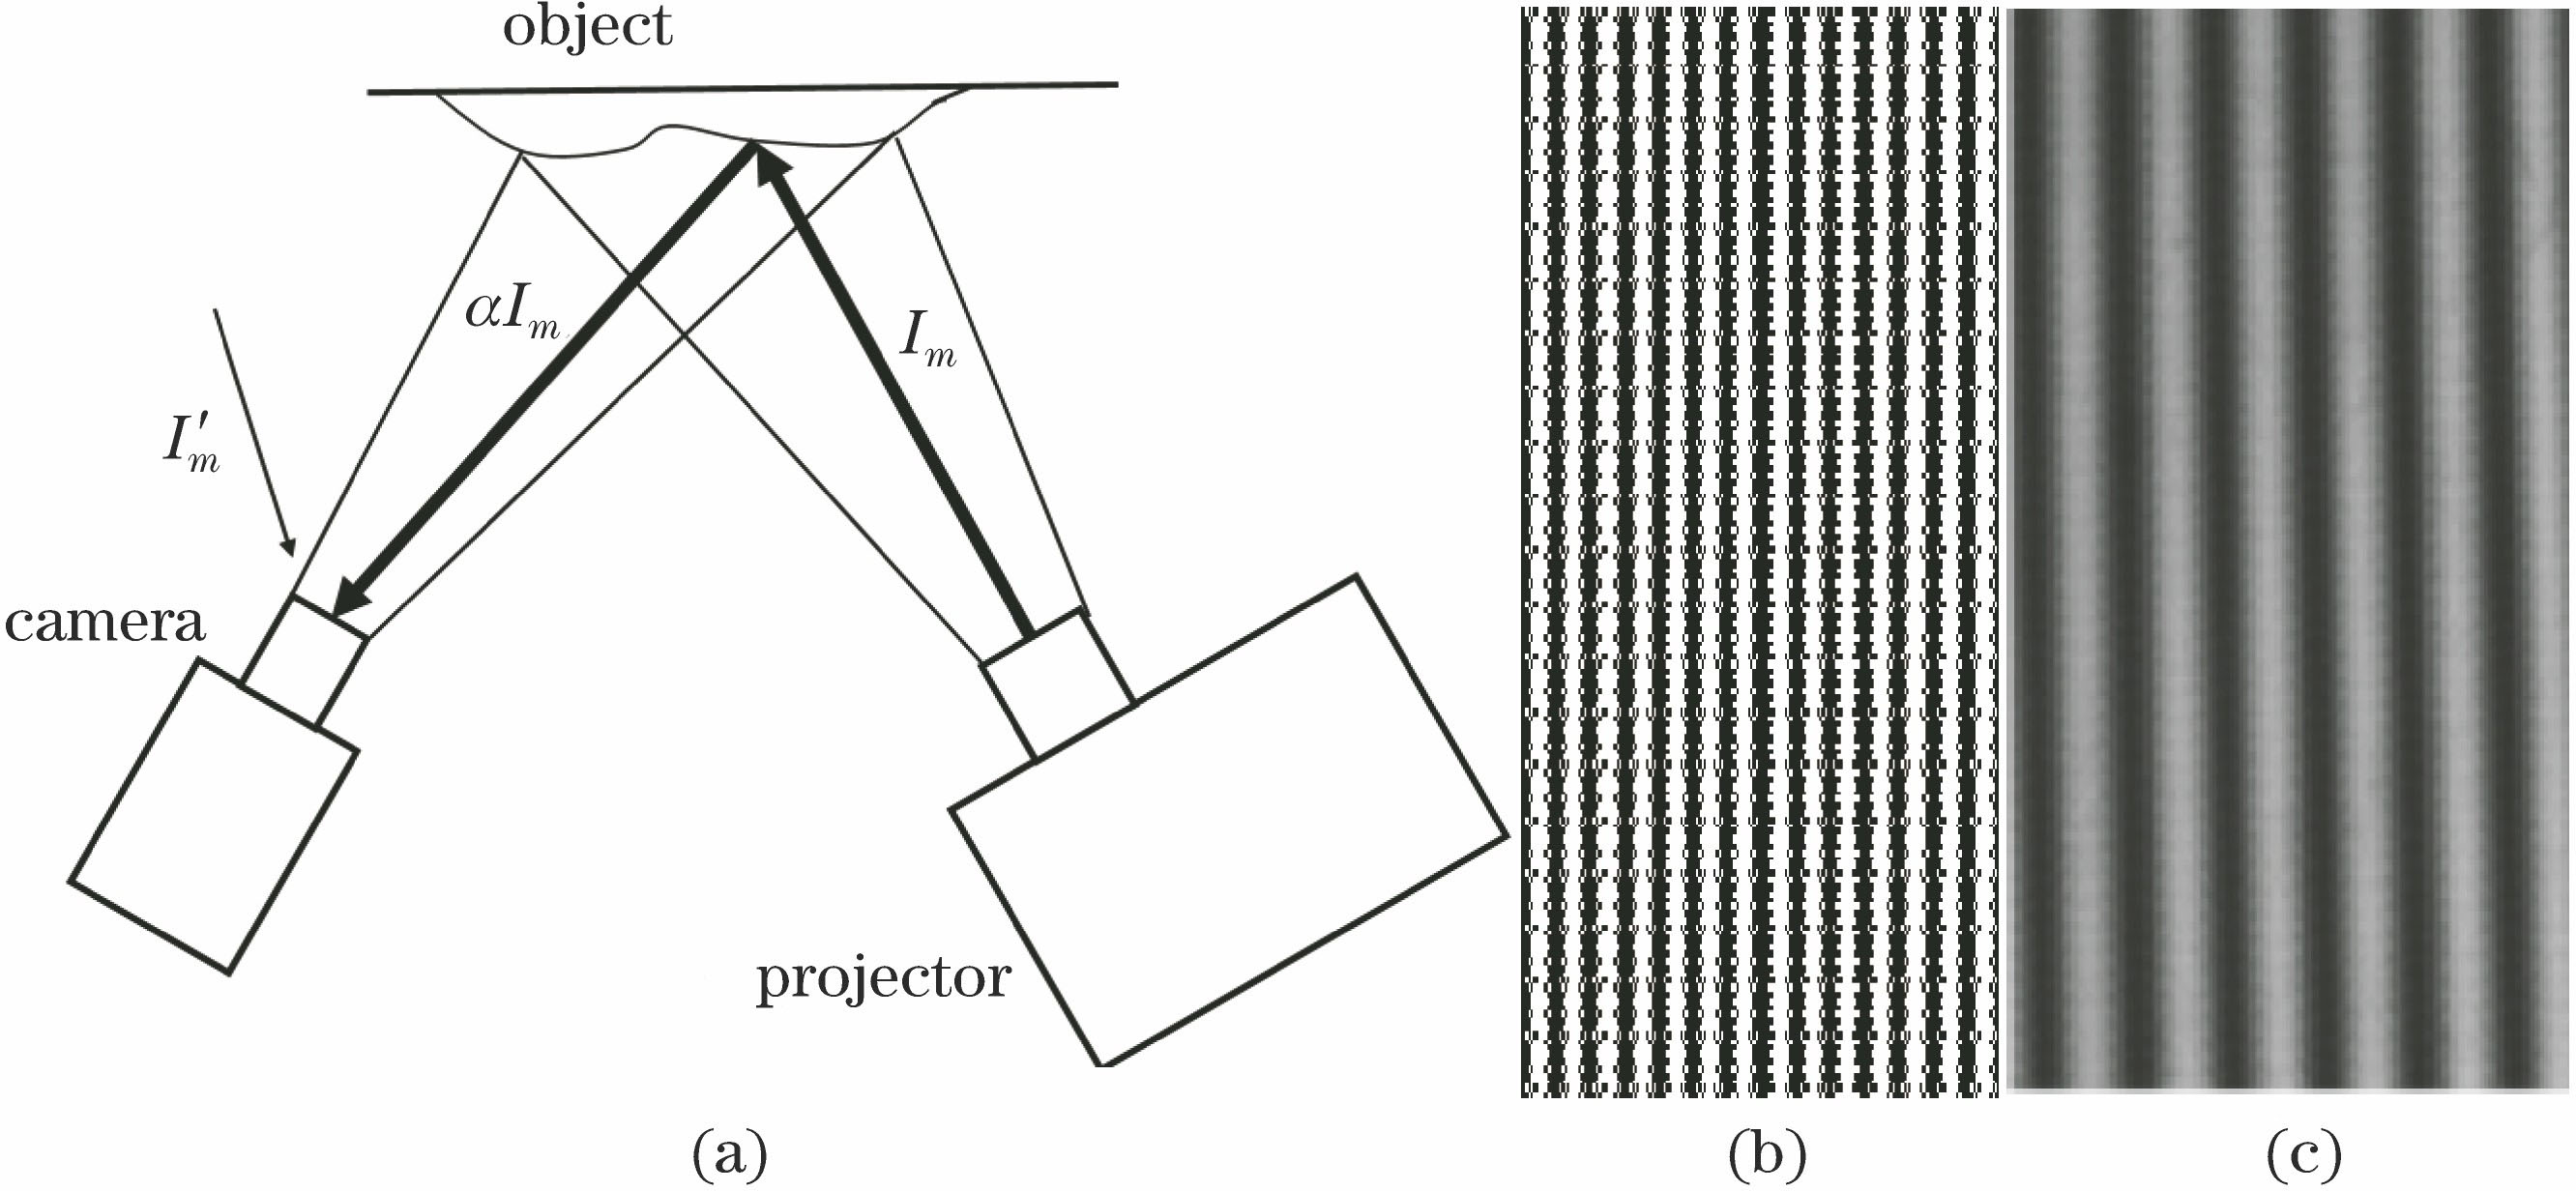 Schematic of three-dimensional measurement system and grating fringe patterns. (a) Three-dimensional measurement system of structured light; (b) binary grating fringe pattern; (c) binary grating fringe pattern after defocusing